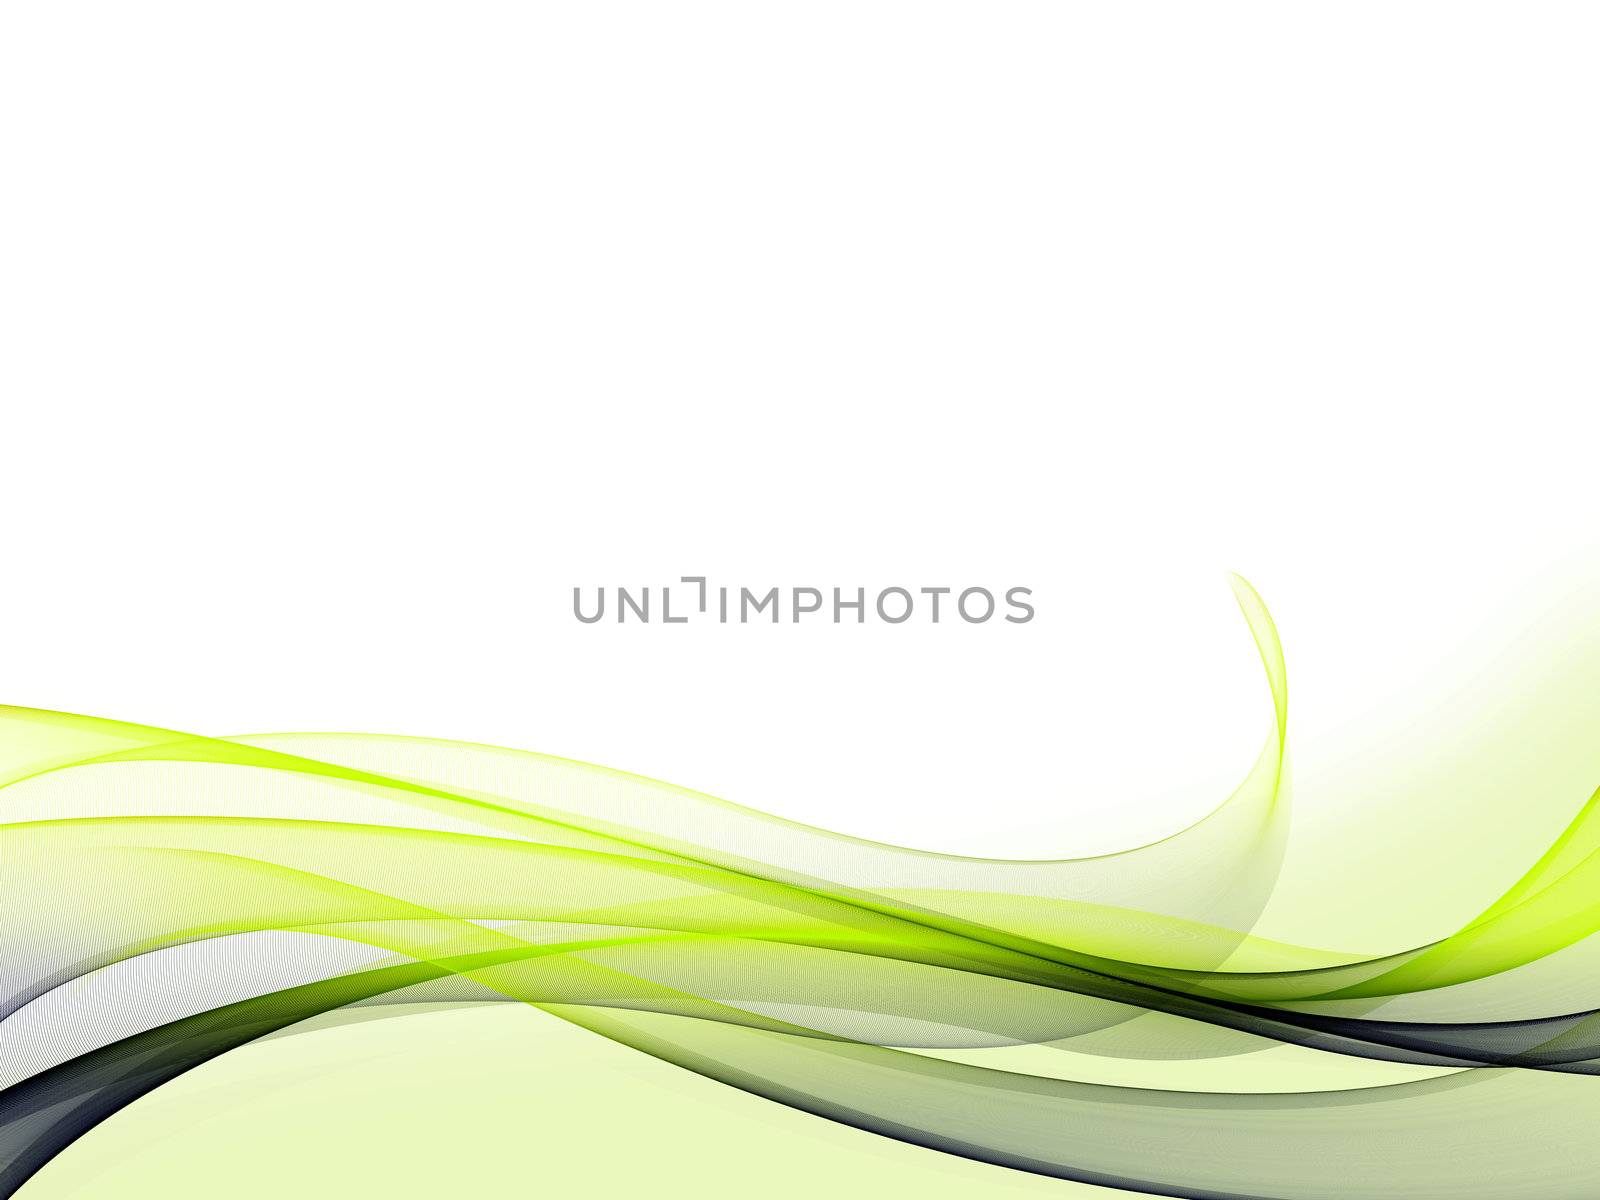 A set of blue/green gradient dynamic waves and lines with light green background on bottom